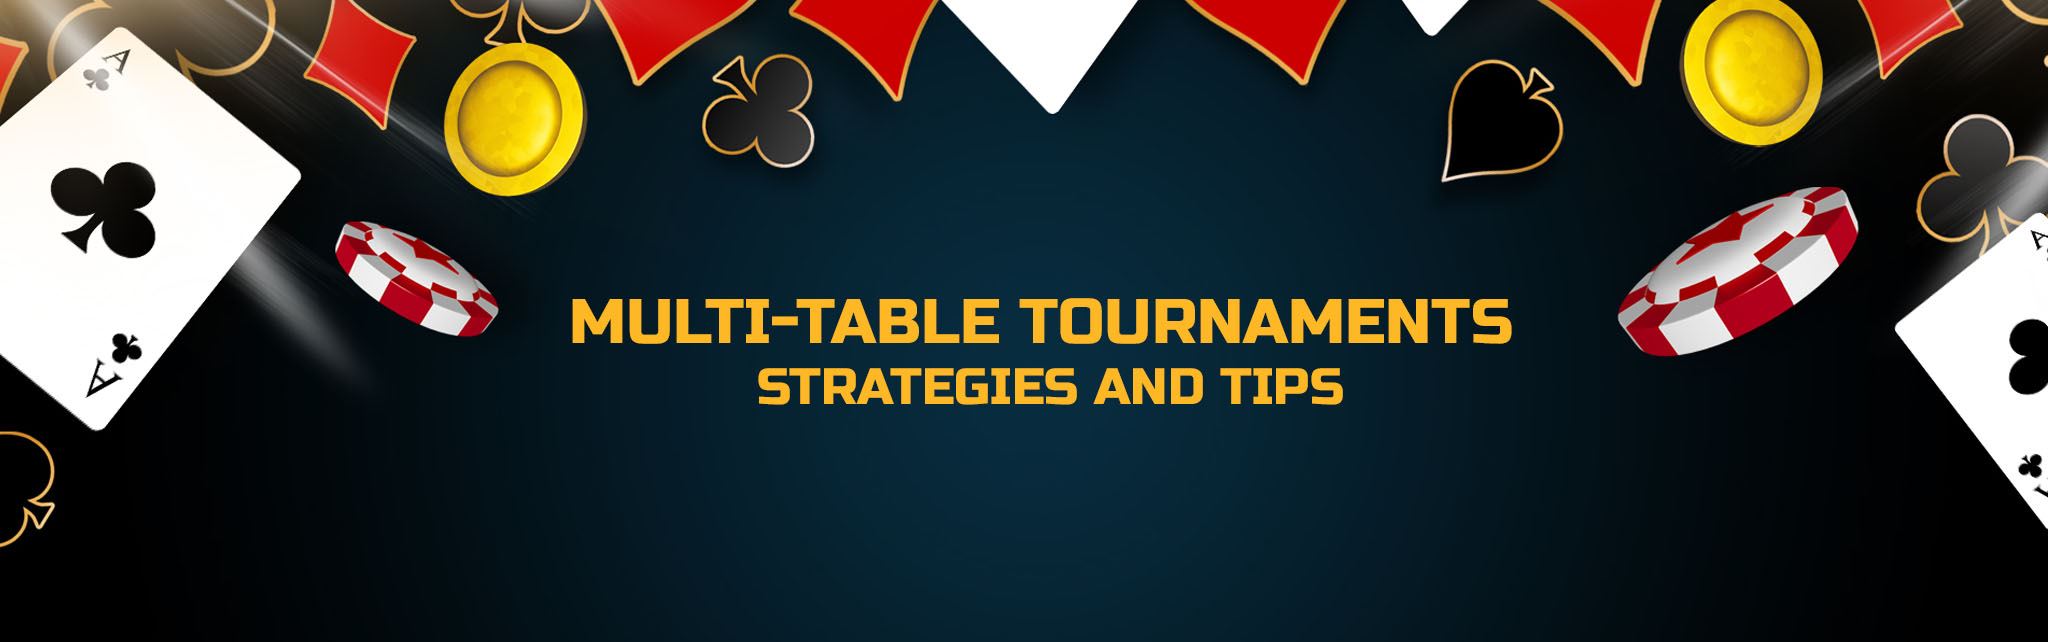 Multi -Table Tournament Strategies and Tips